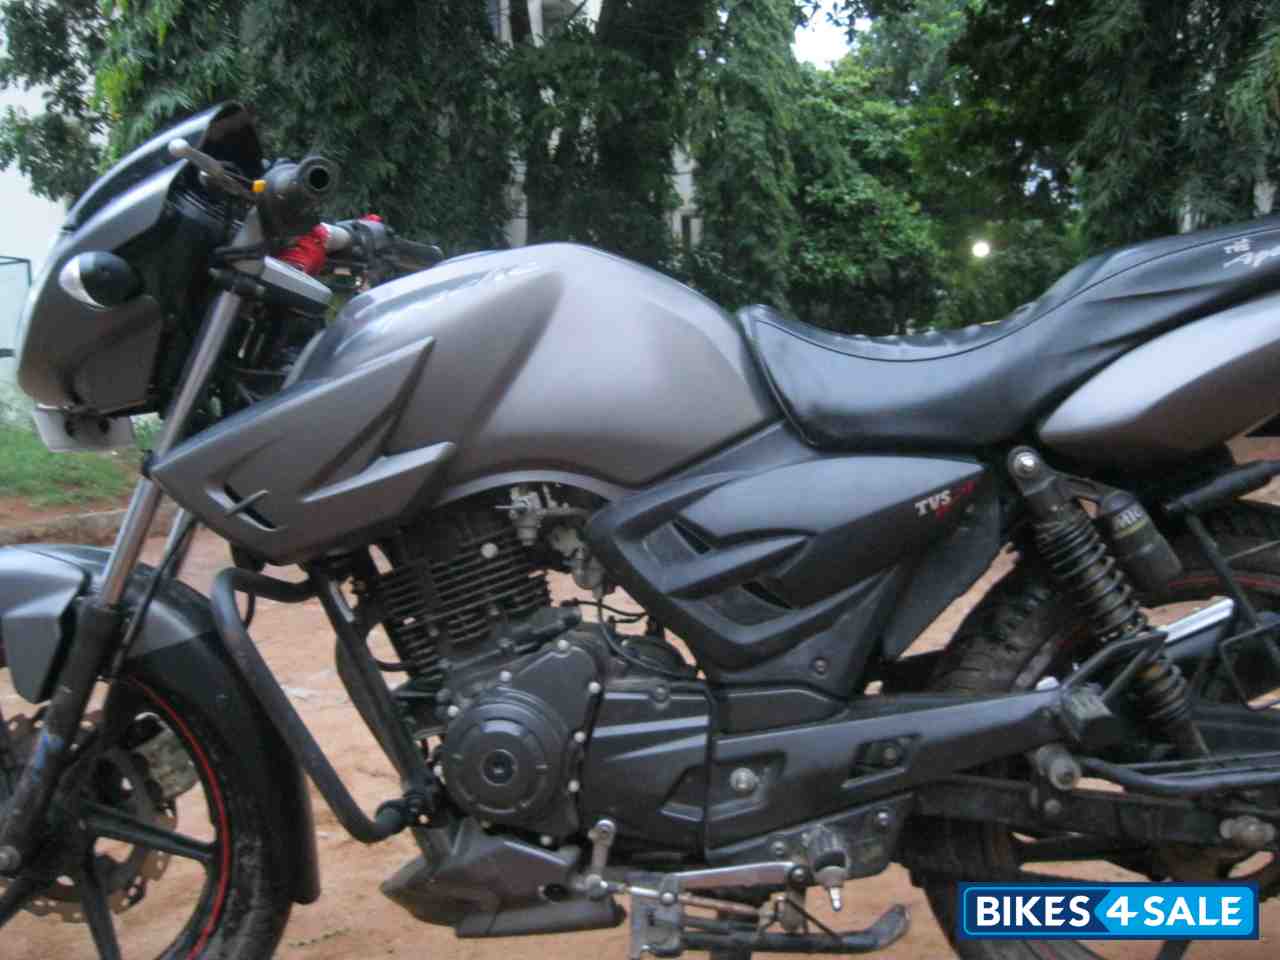 Rtr 160 Old Model Cheaper Than Retail Price Buy Clothing Accessories And Lifestyle Products For Women Men